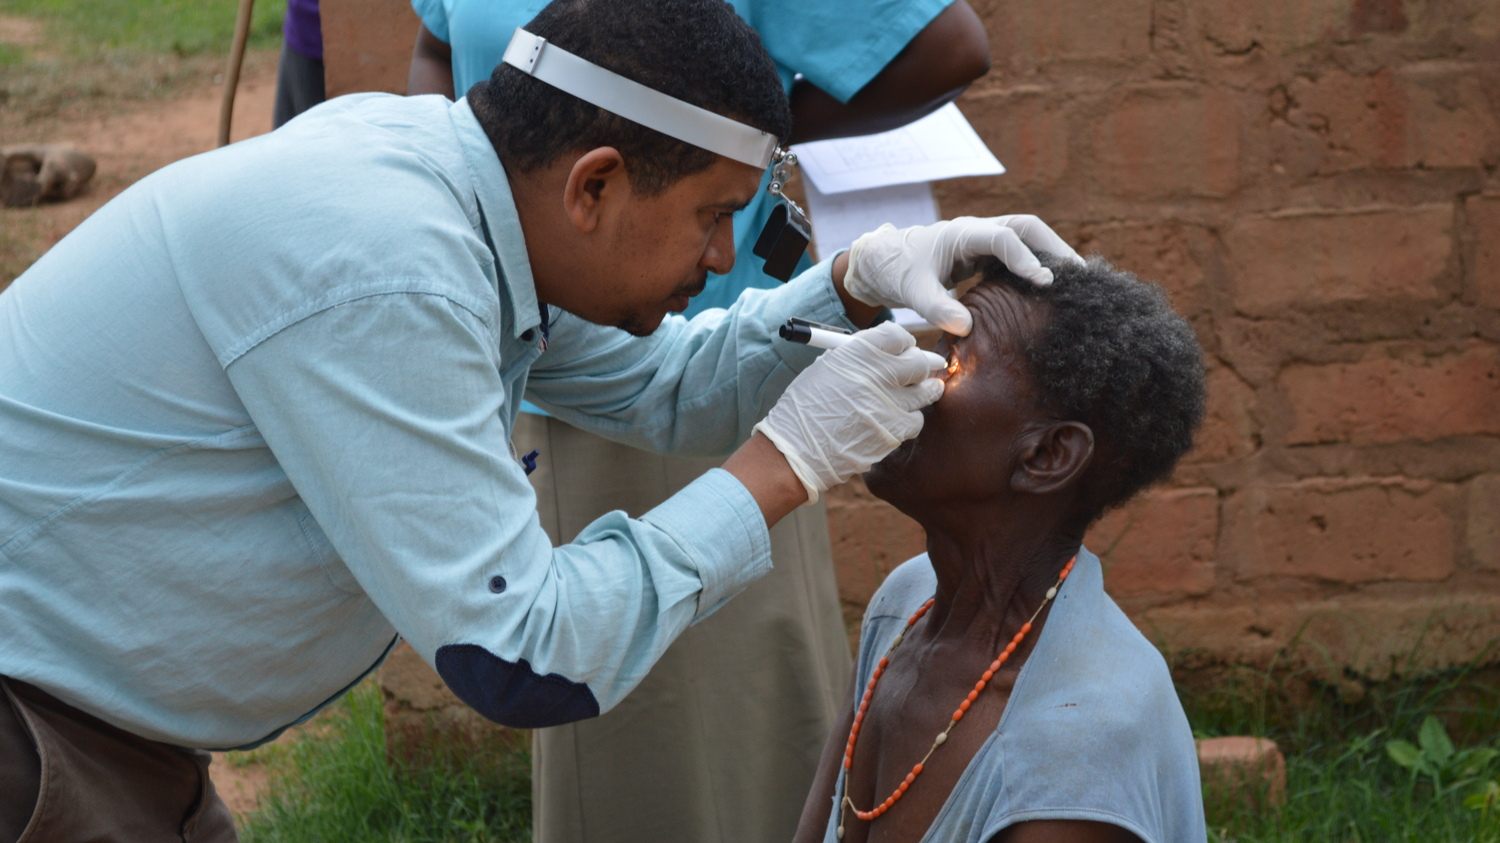 A health professional uses a piece of medical equipment to examine the eye of the patient. The doctor wearing a white shirt, and a female patient is wearing a blue dress and a necklace of beads.